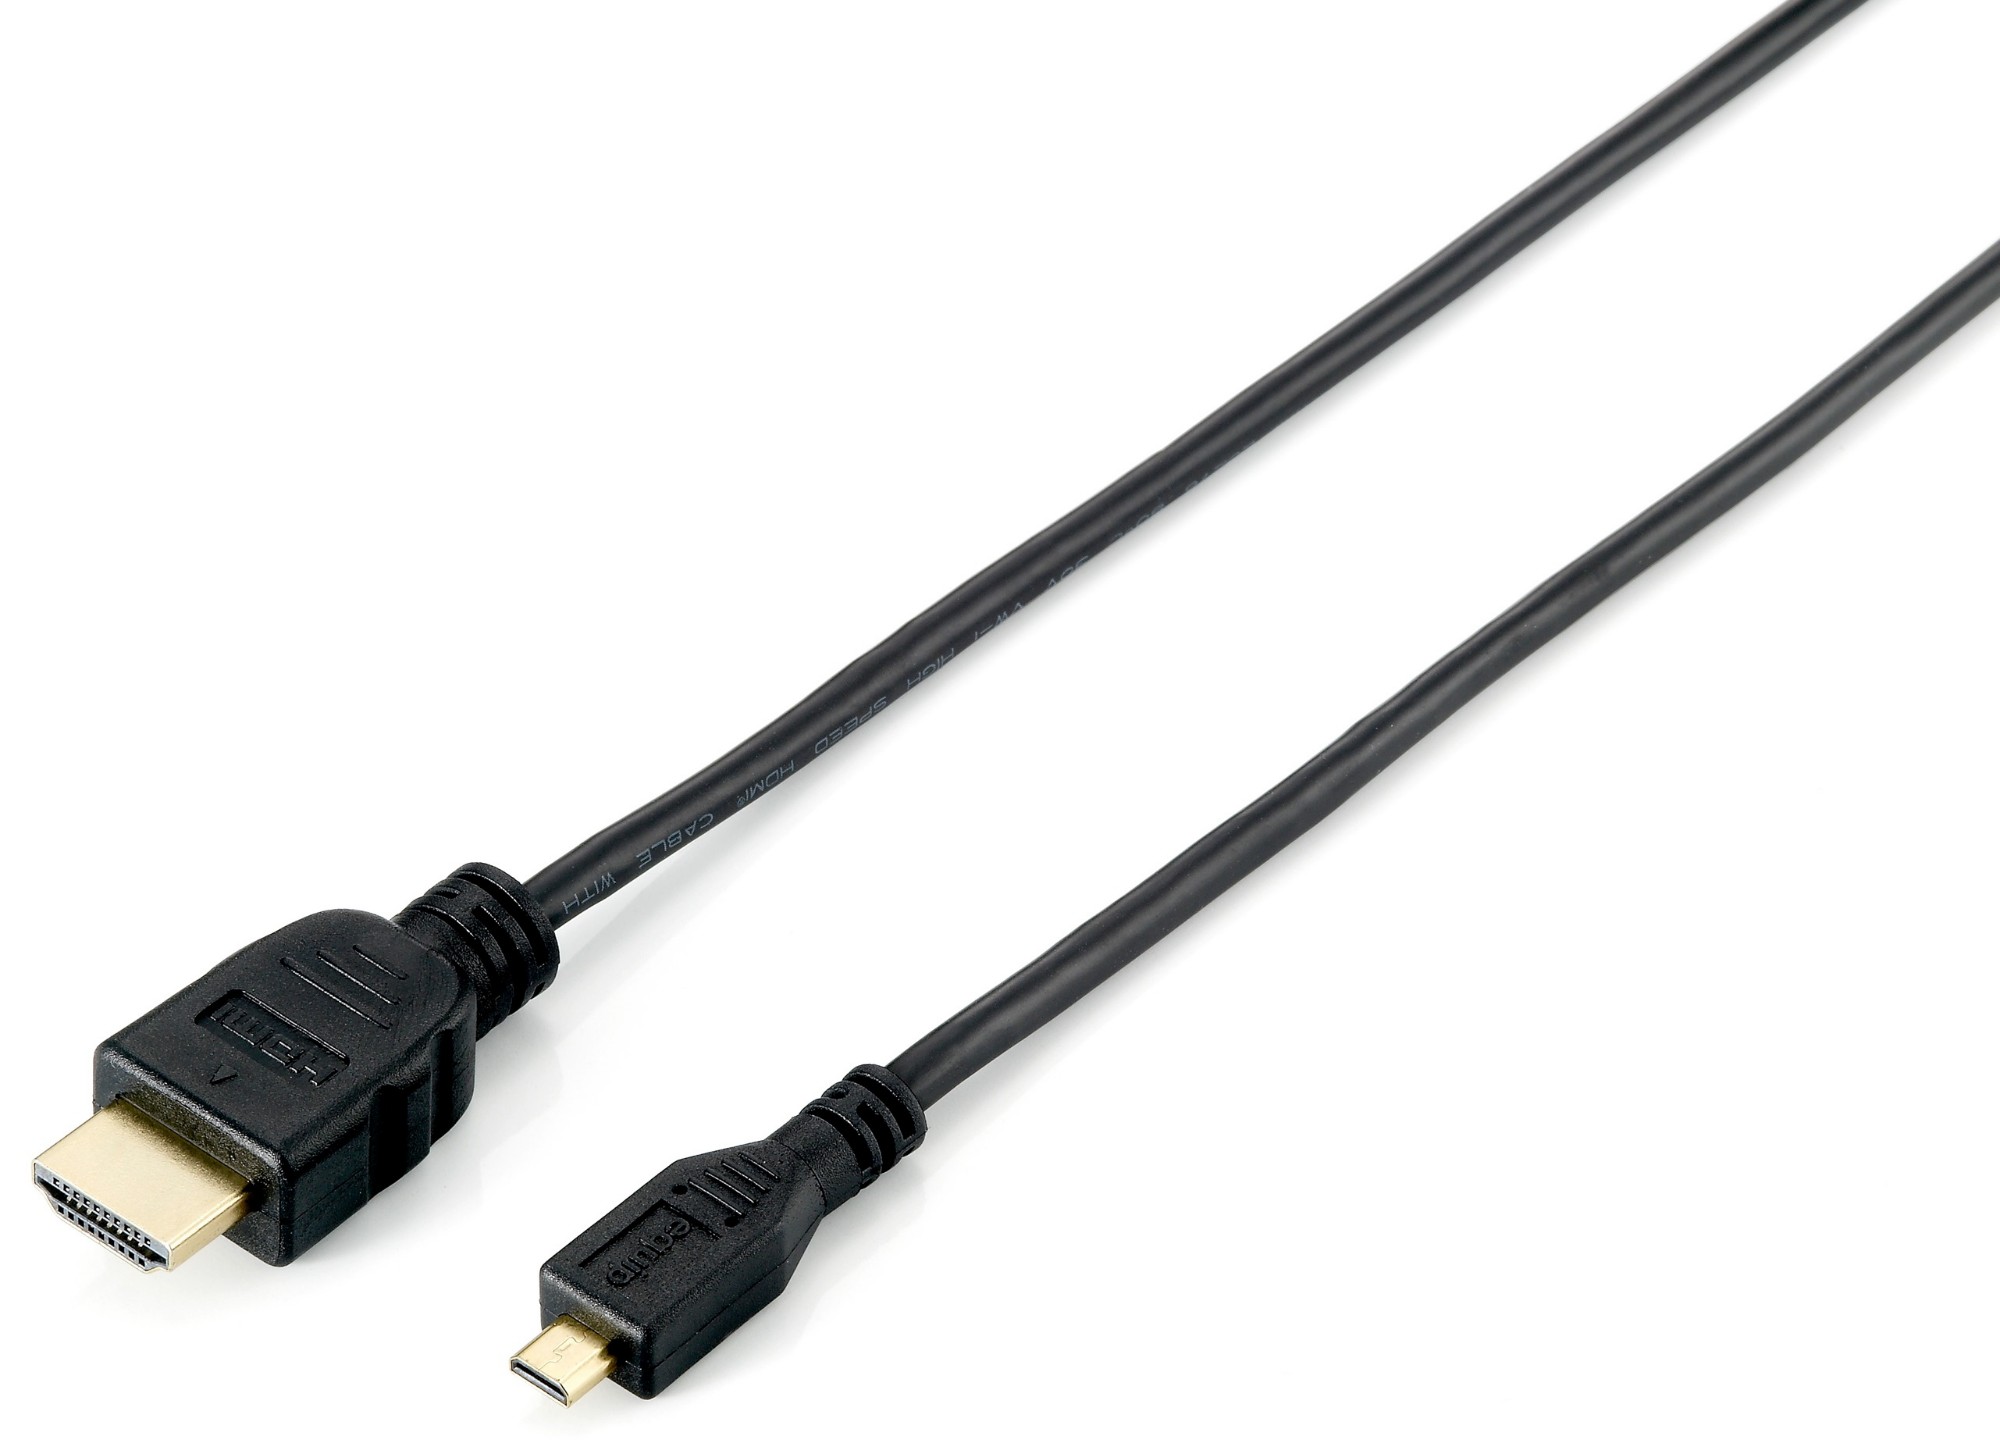 Photos - Cable (video, audio, USB) Equip HDMI 1.4 to Micro HDMI Cable, 1m 119309 